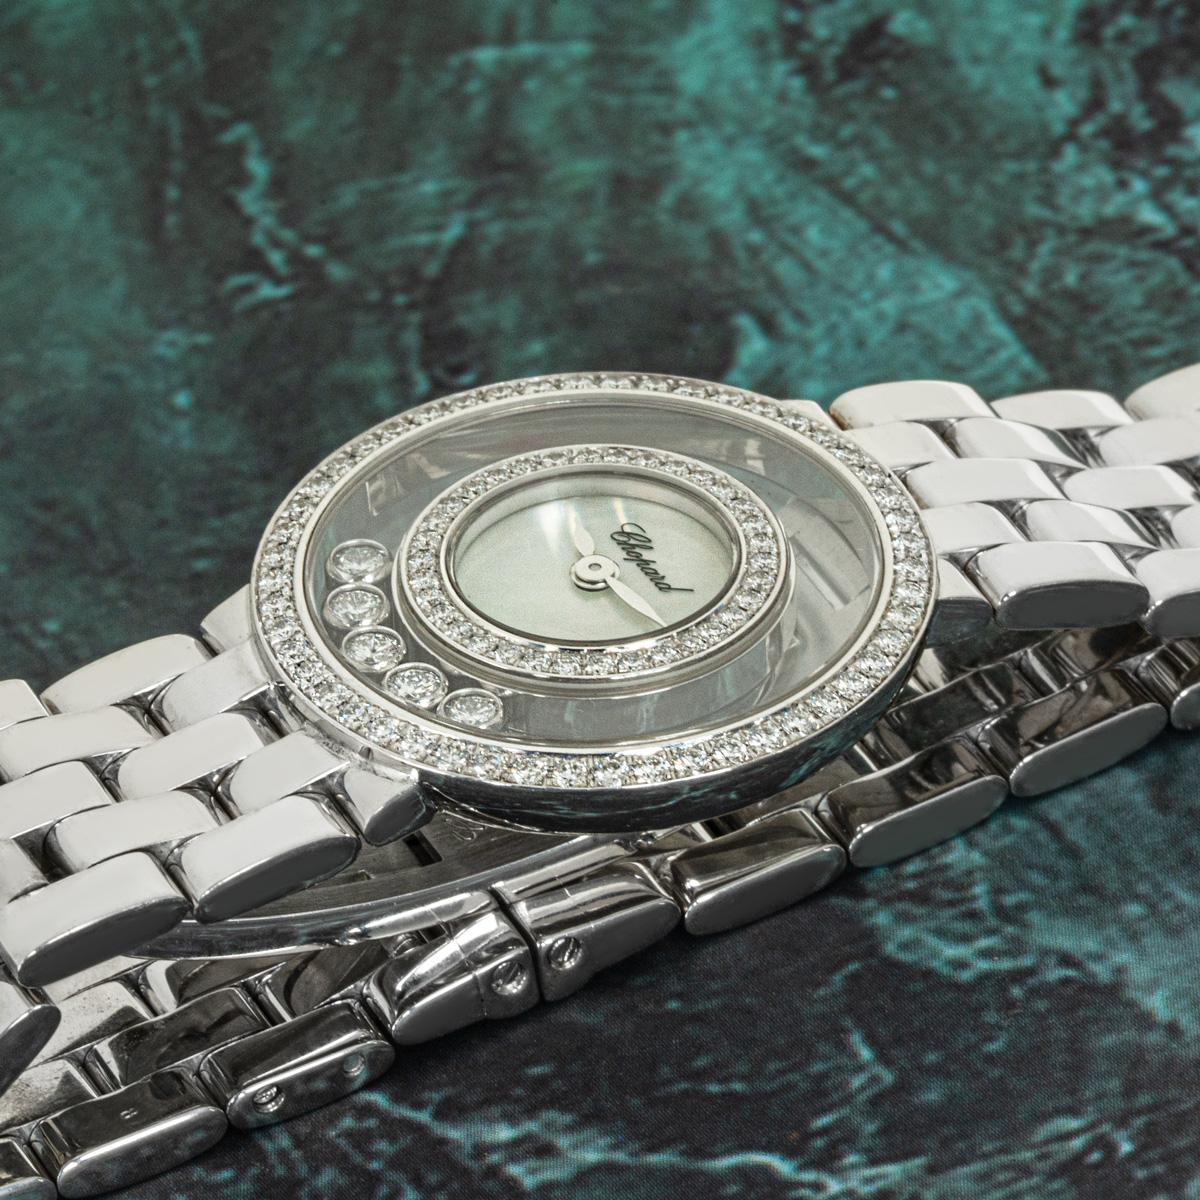 A white gold diamond-set timepiece by Chopard from their Happy Diamonds collection. Featuring a mother of pearl dial surrounded by approximately 34 round brilliant-cut diamonds set within the inner bezel. Further complementing the watch are 5 round